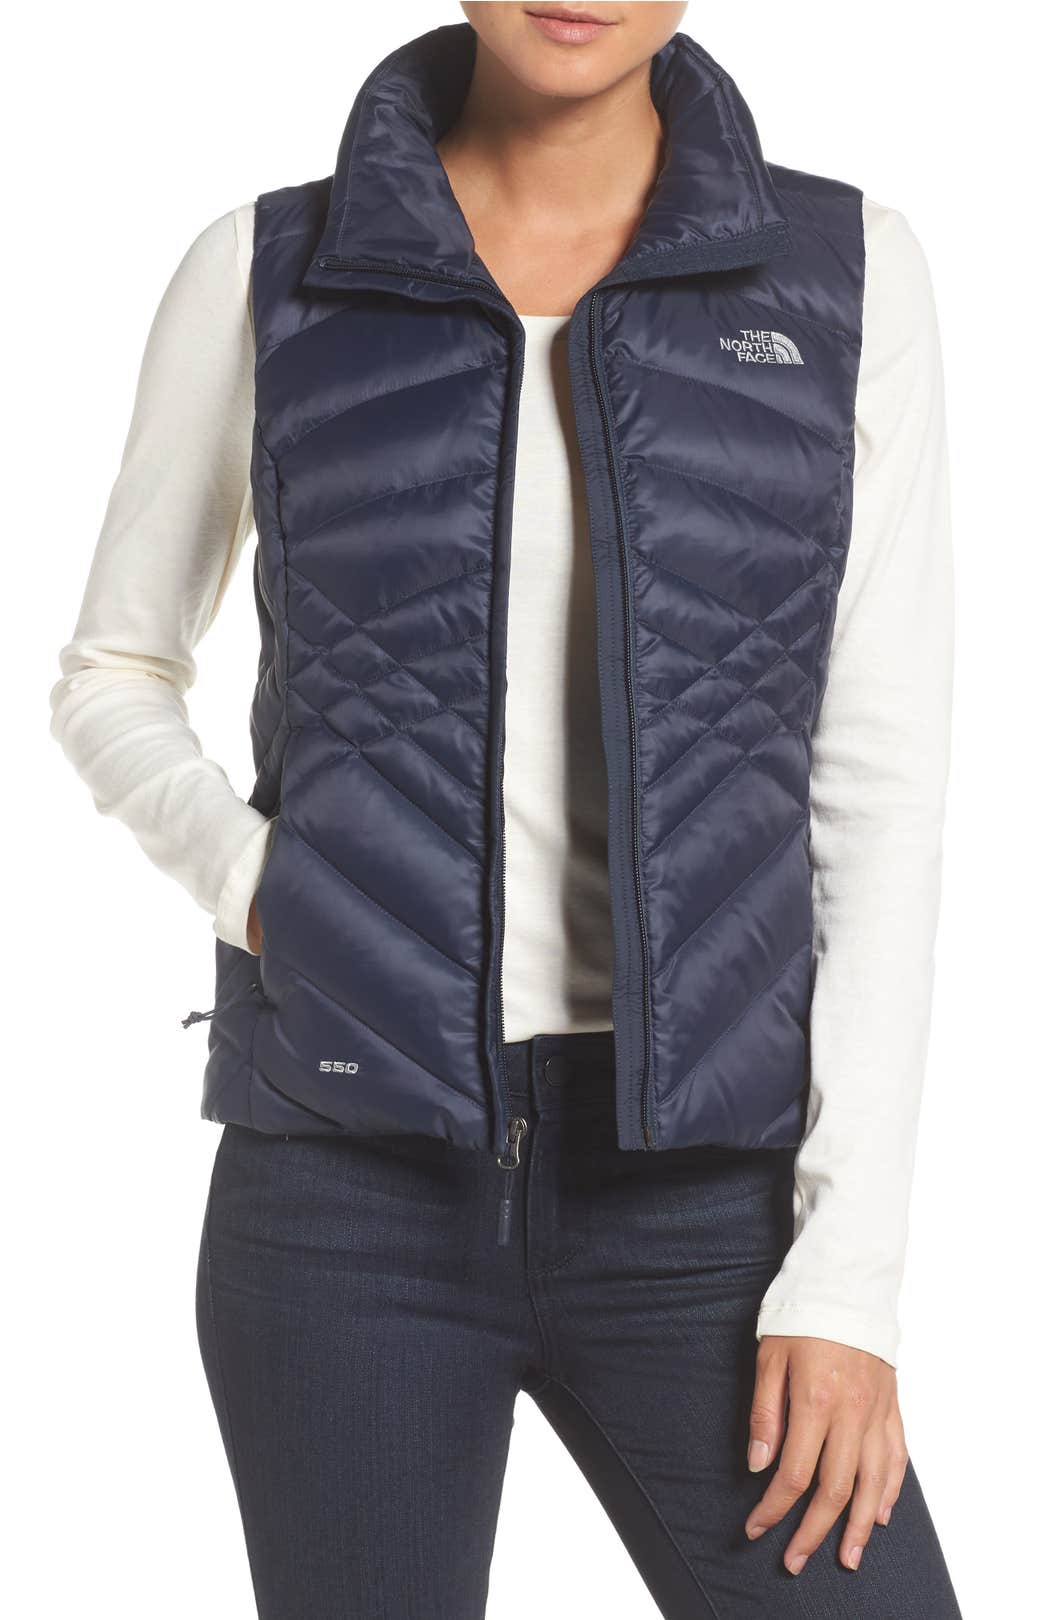 Cute quilted vest